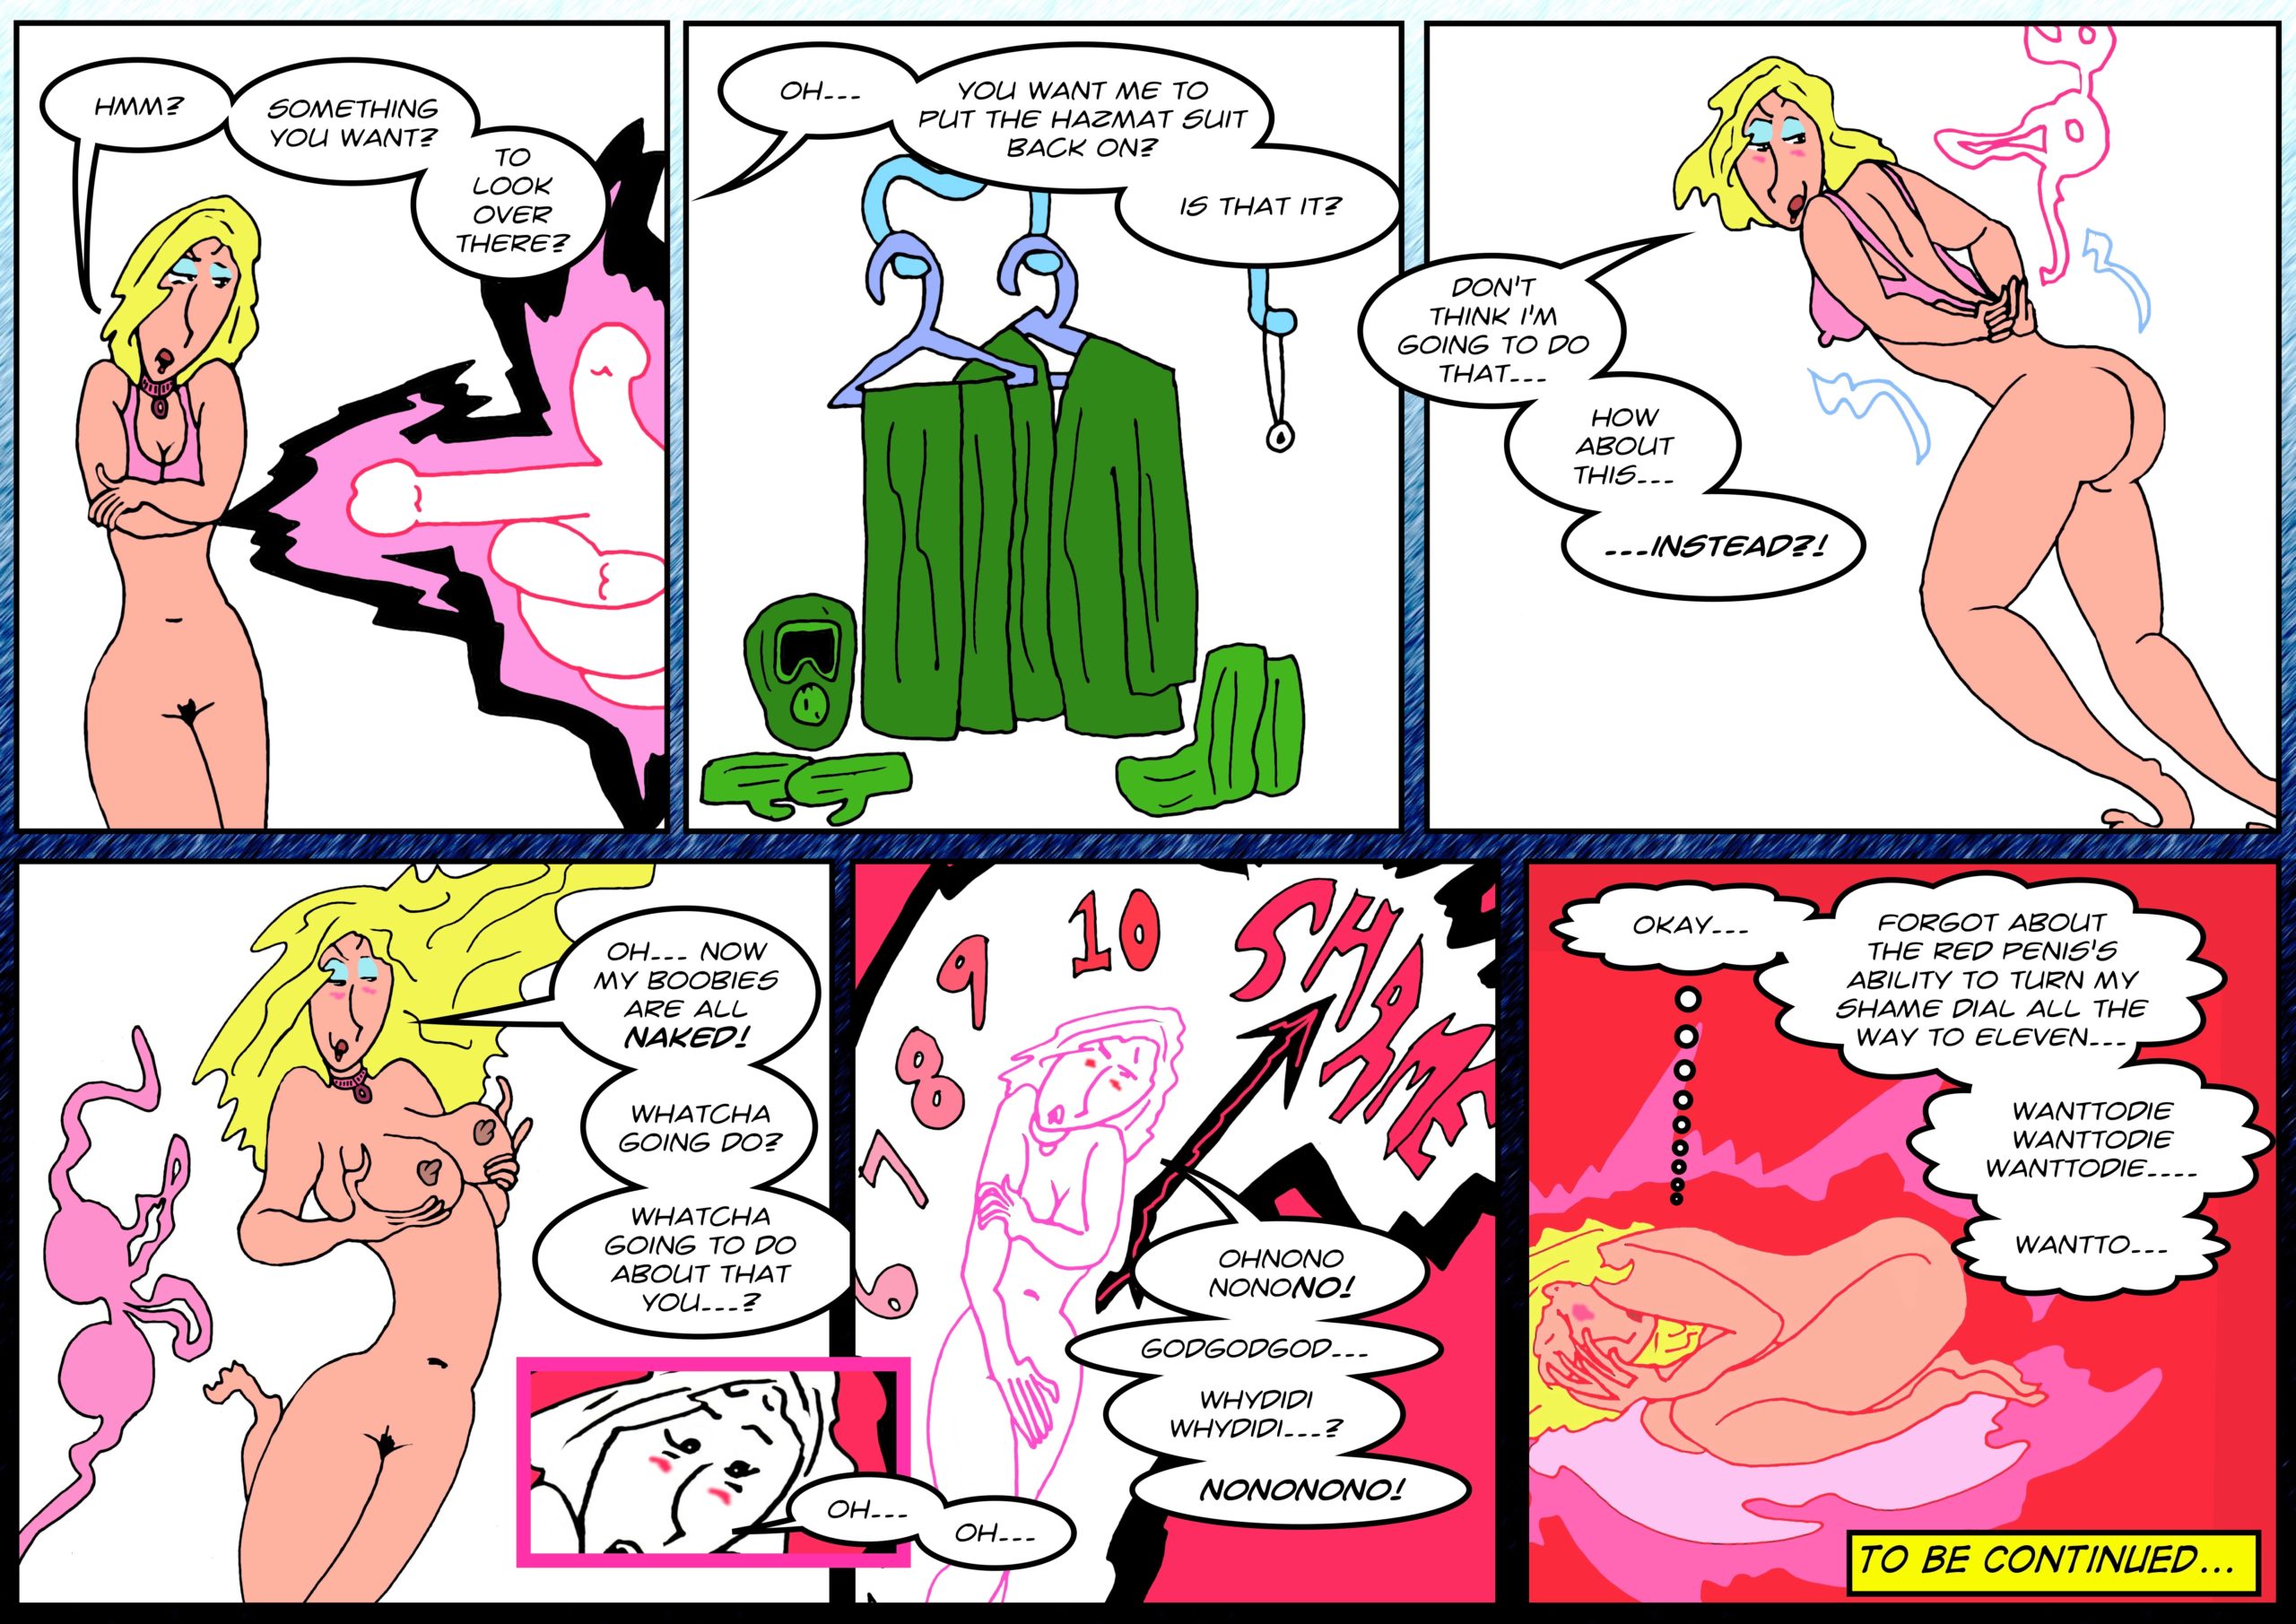 I wonder if being let down by a porn webcomic is a kink for anyone?